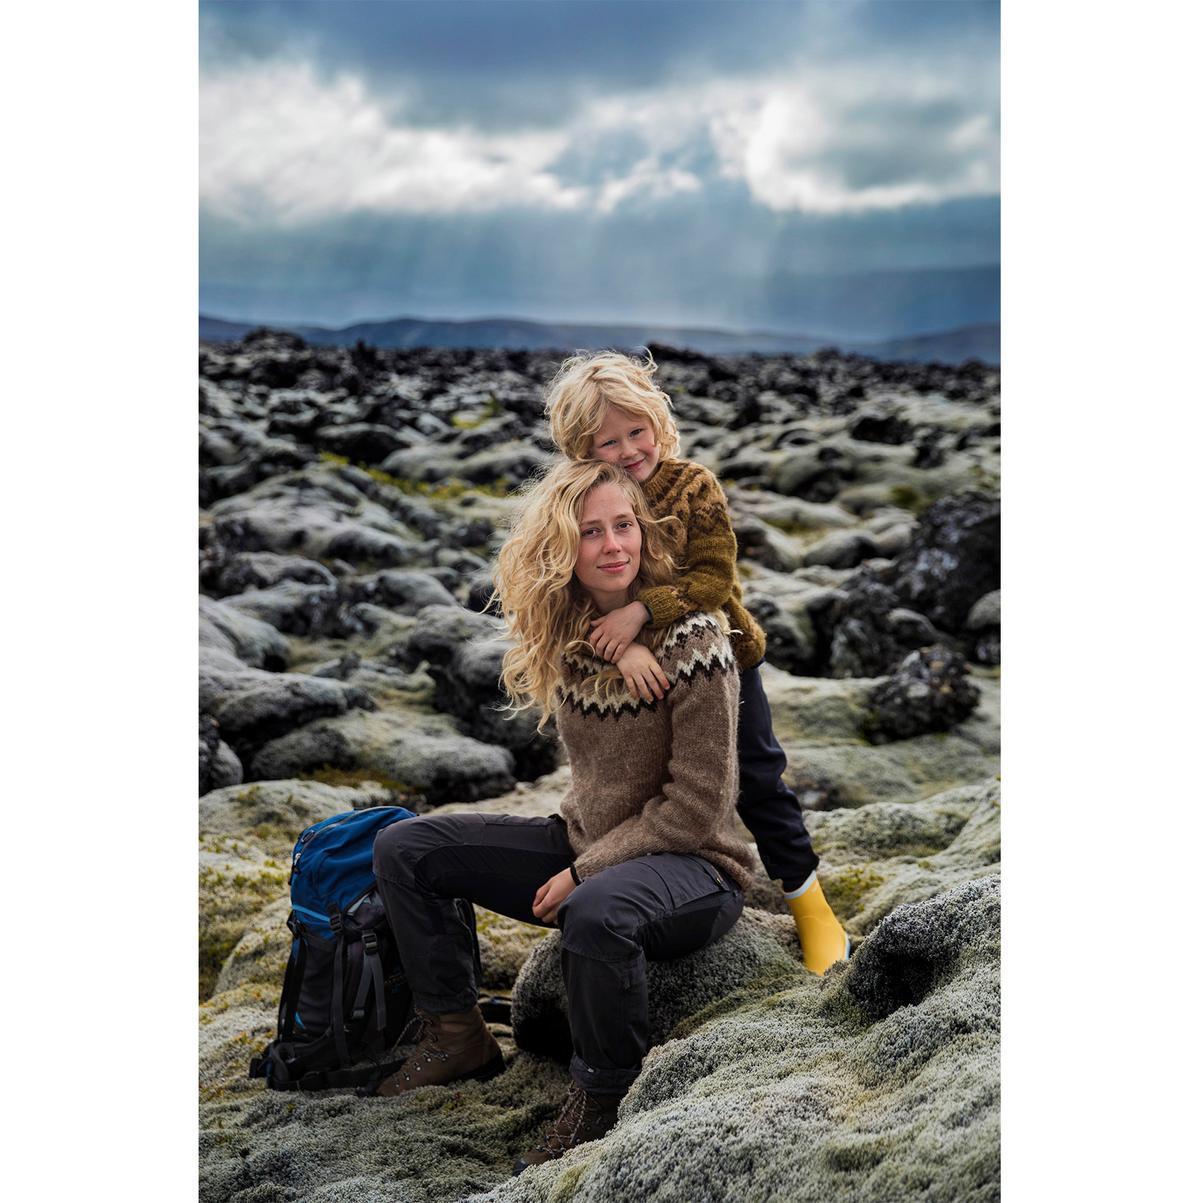 NEAR REYKJAVIK, ICELAND, "Andrea, an adventure guide, and her son Benjamin" (Courtesy of <a href="https://theatlasofbeauty.com/">Mihaela Noroc</a>)